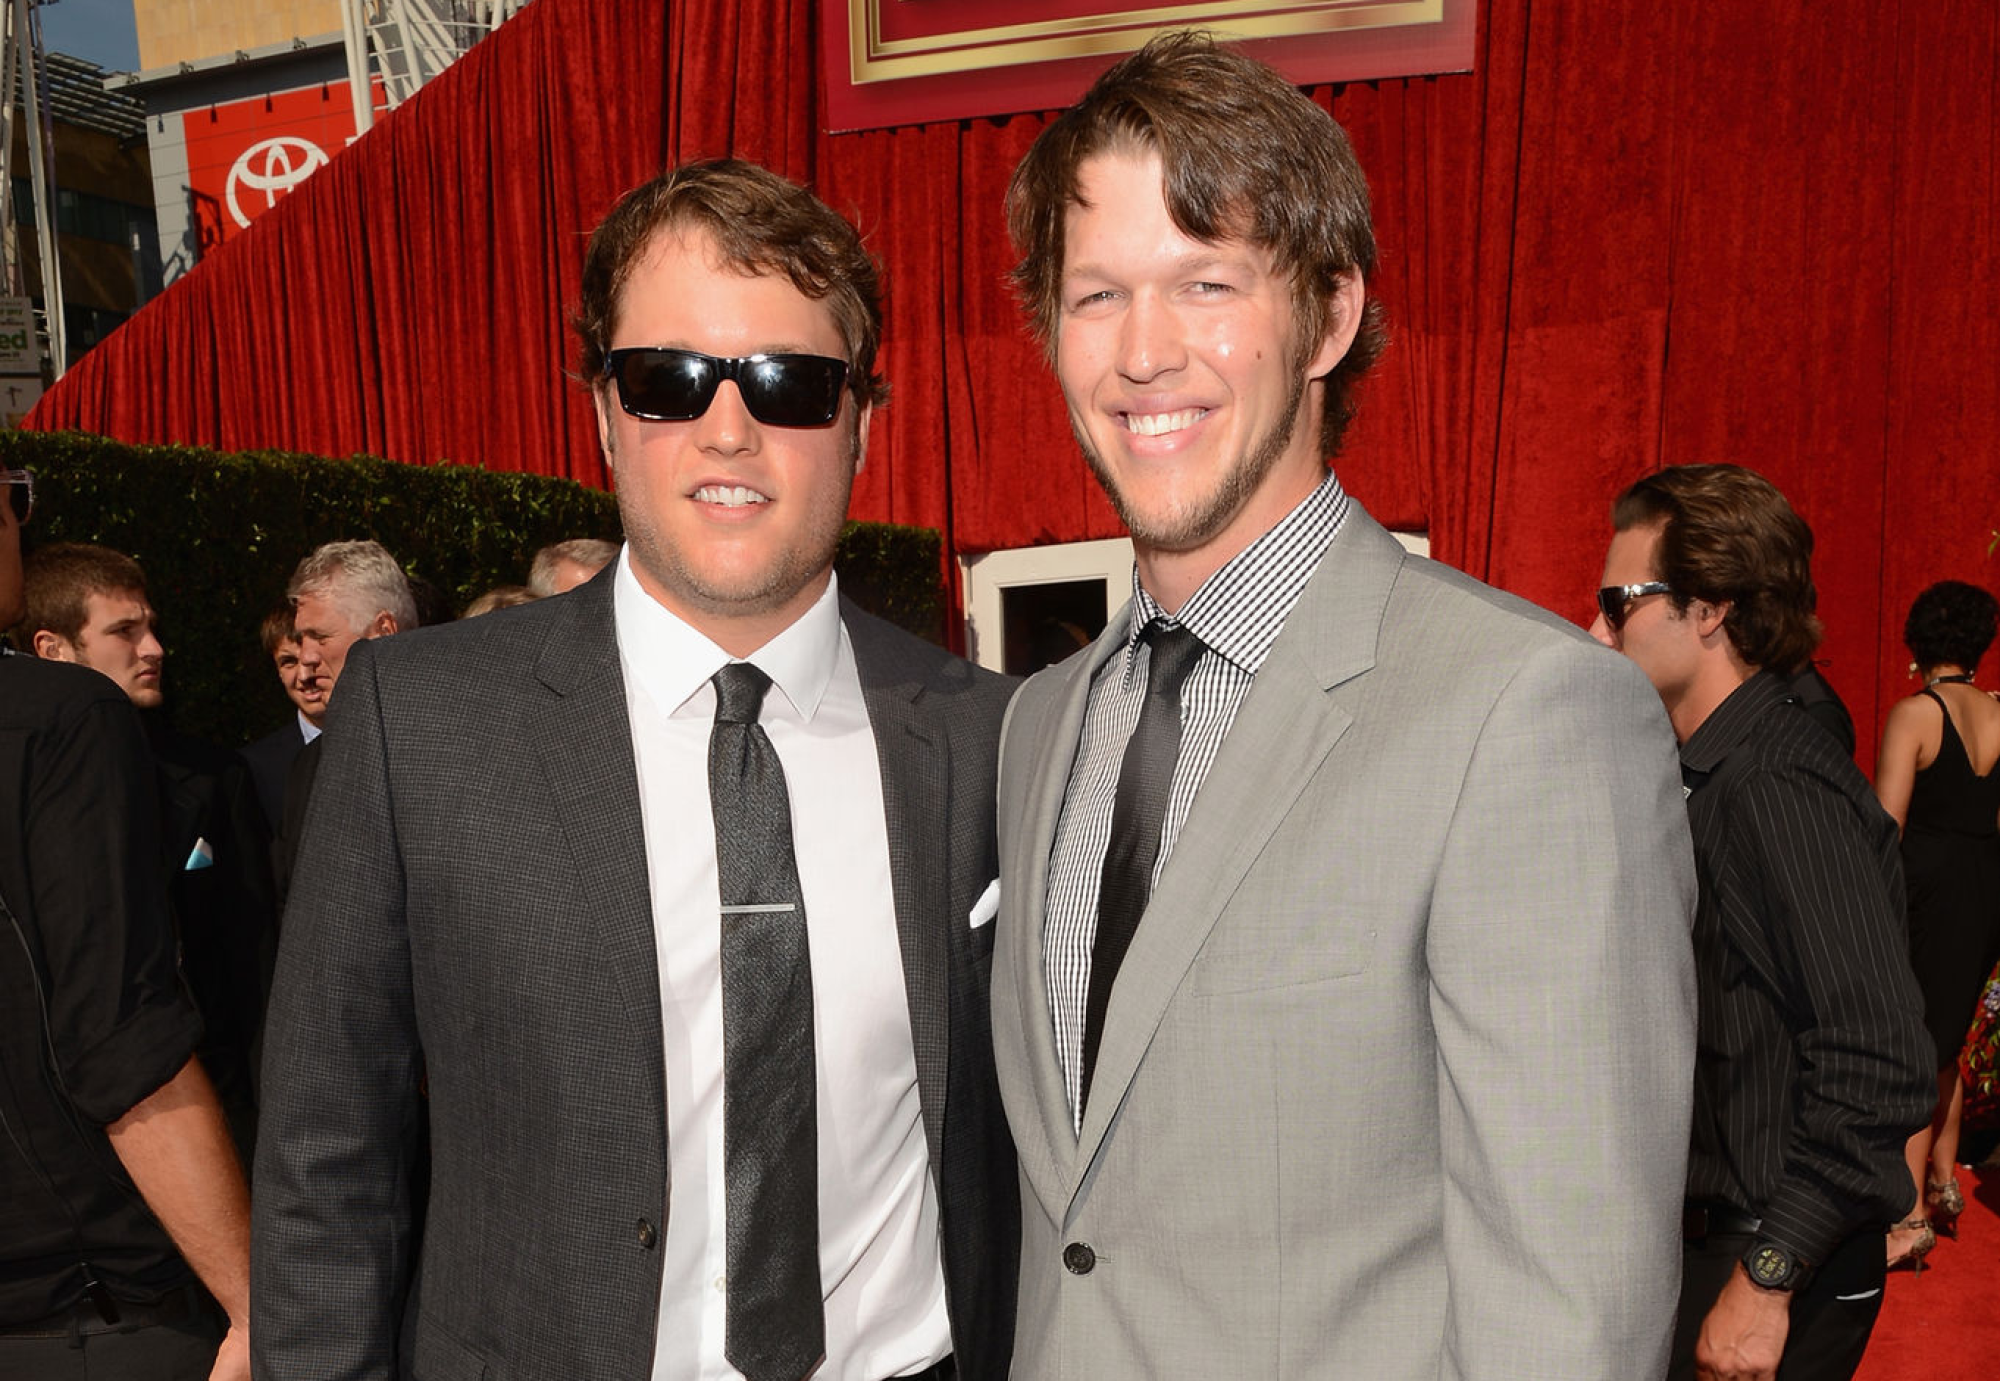 Matthew Stafford and Clayton Kershaw in suits.